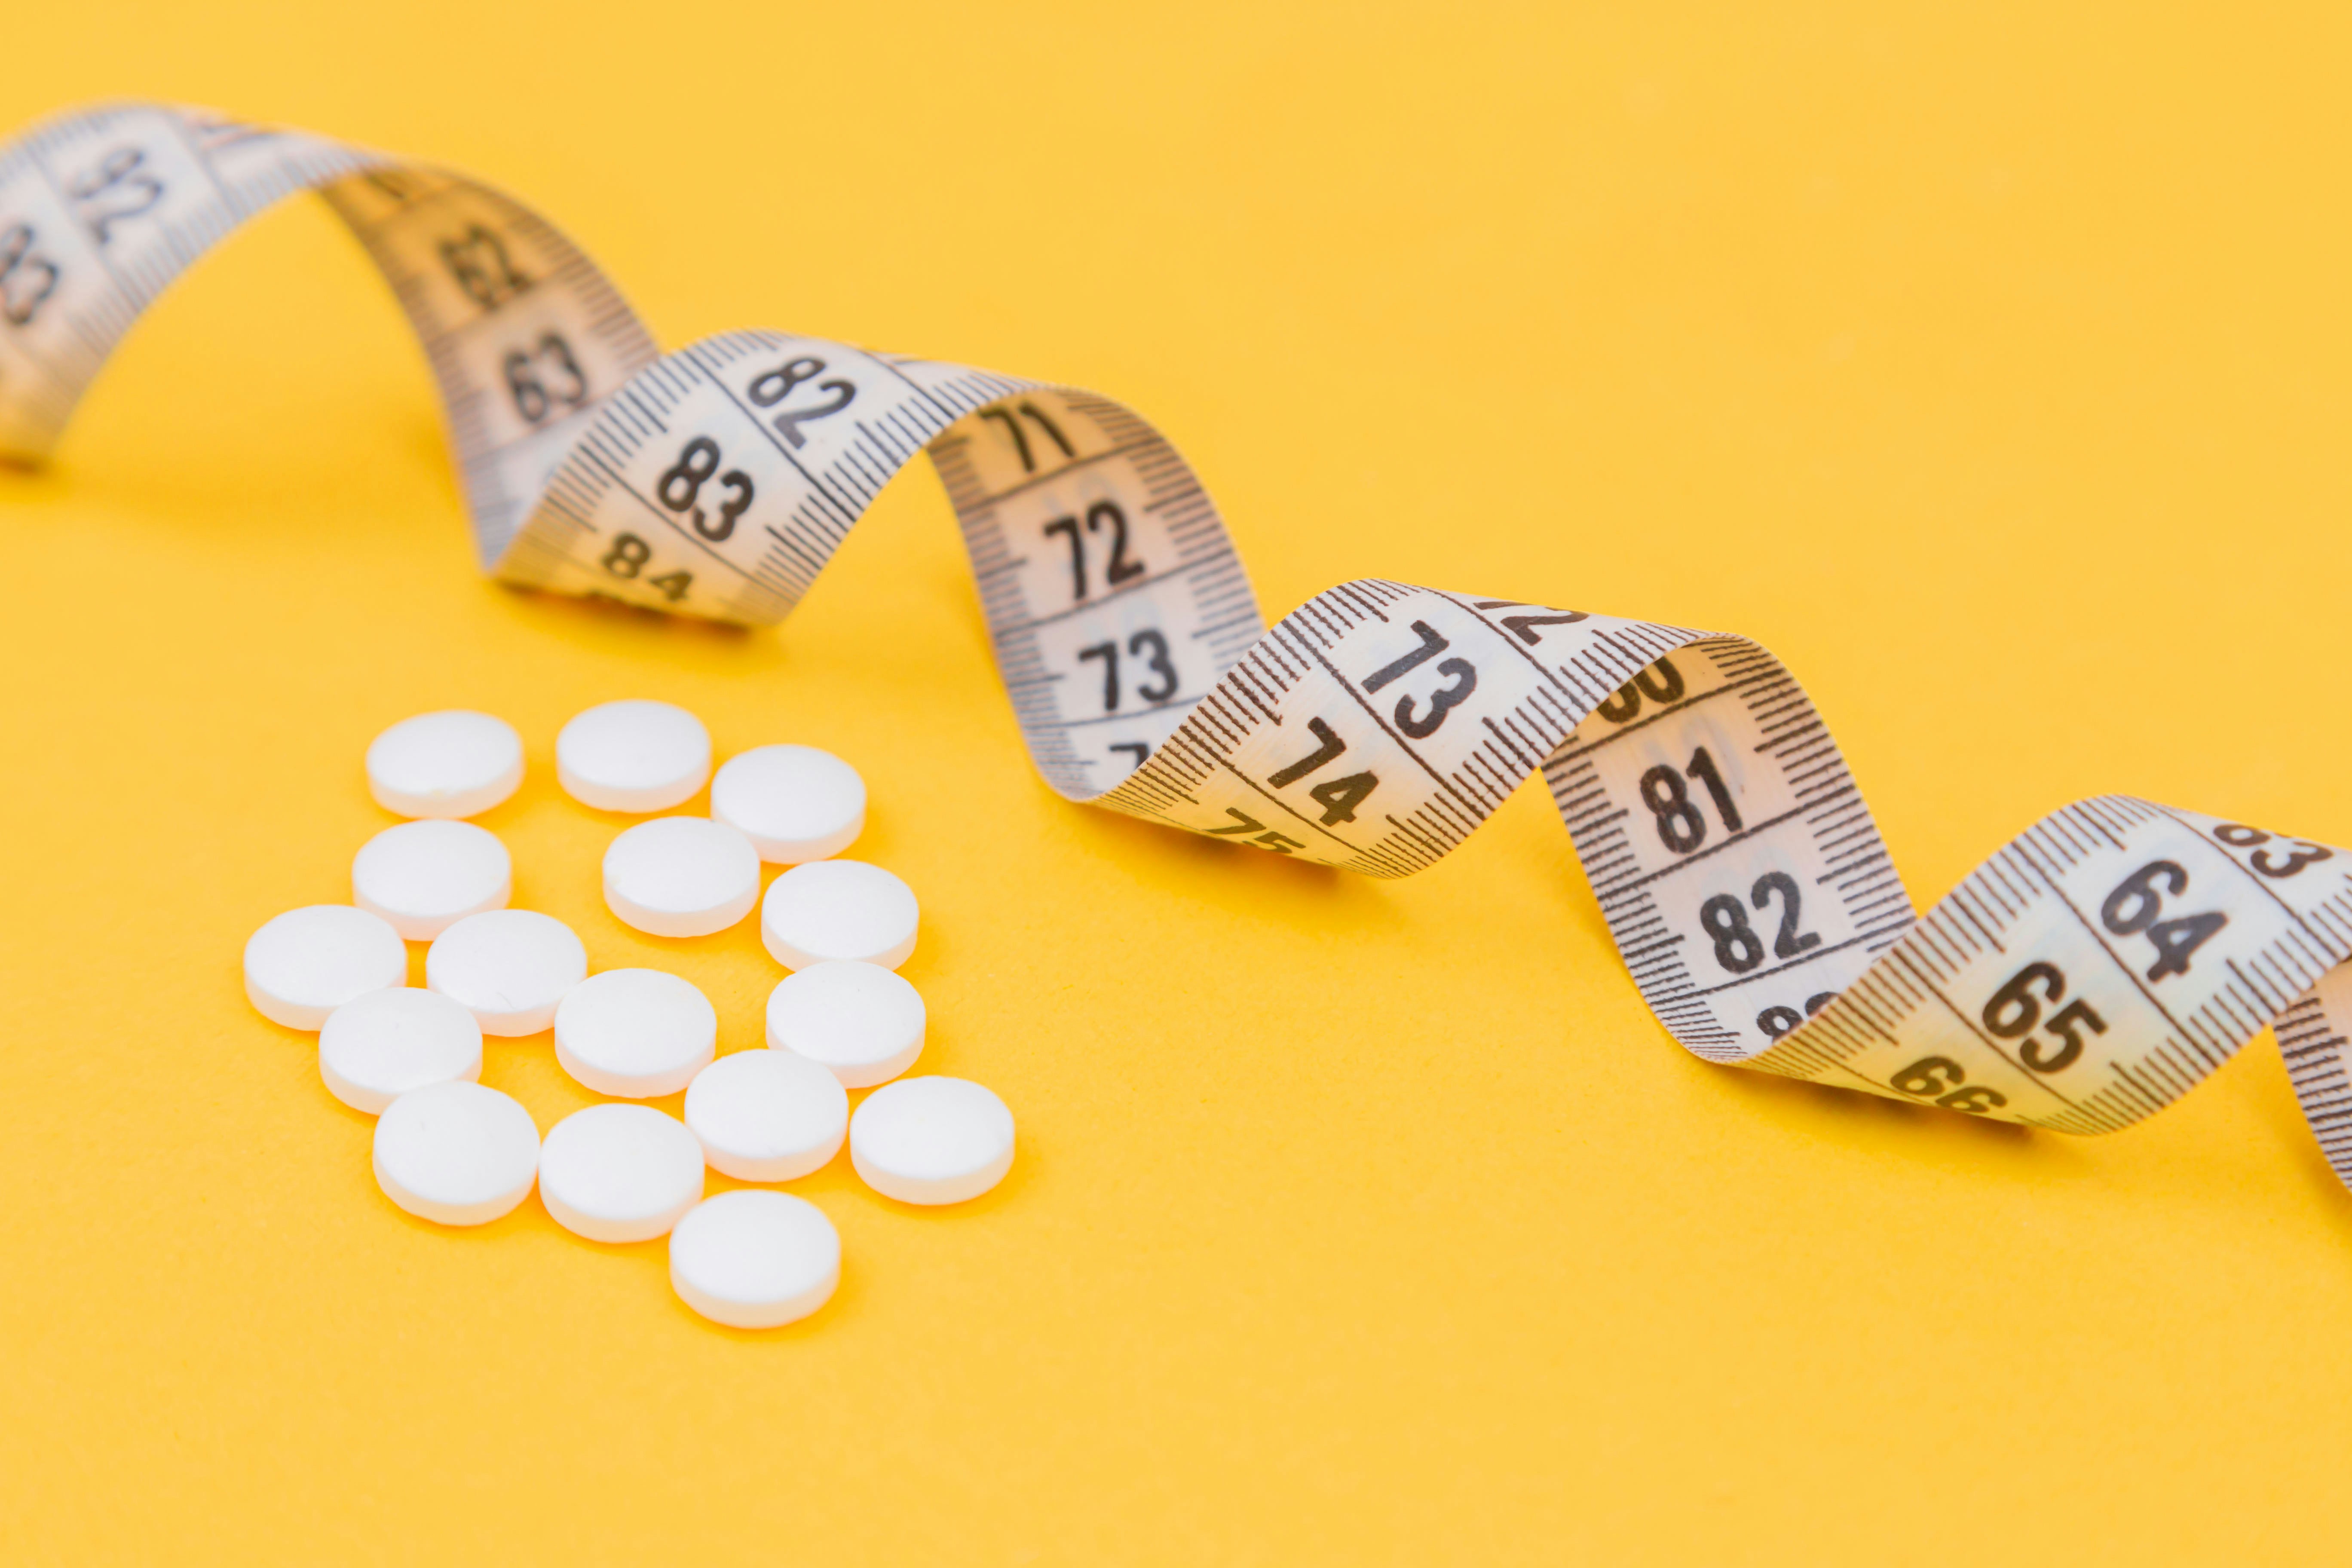 Guest Feature on Weight Loss Medications in This Month's Newlsetter